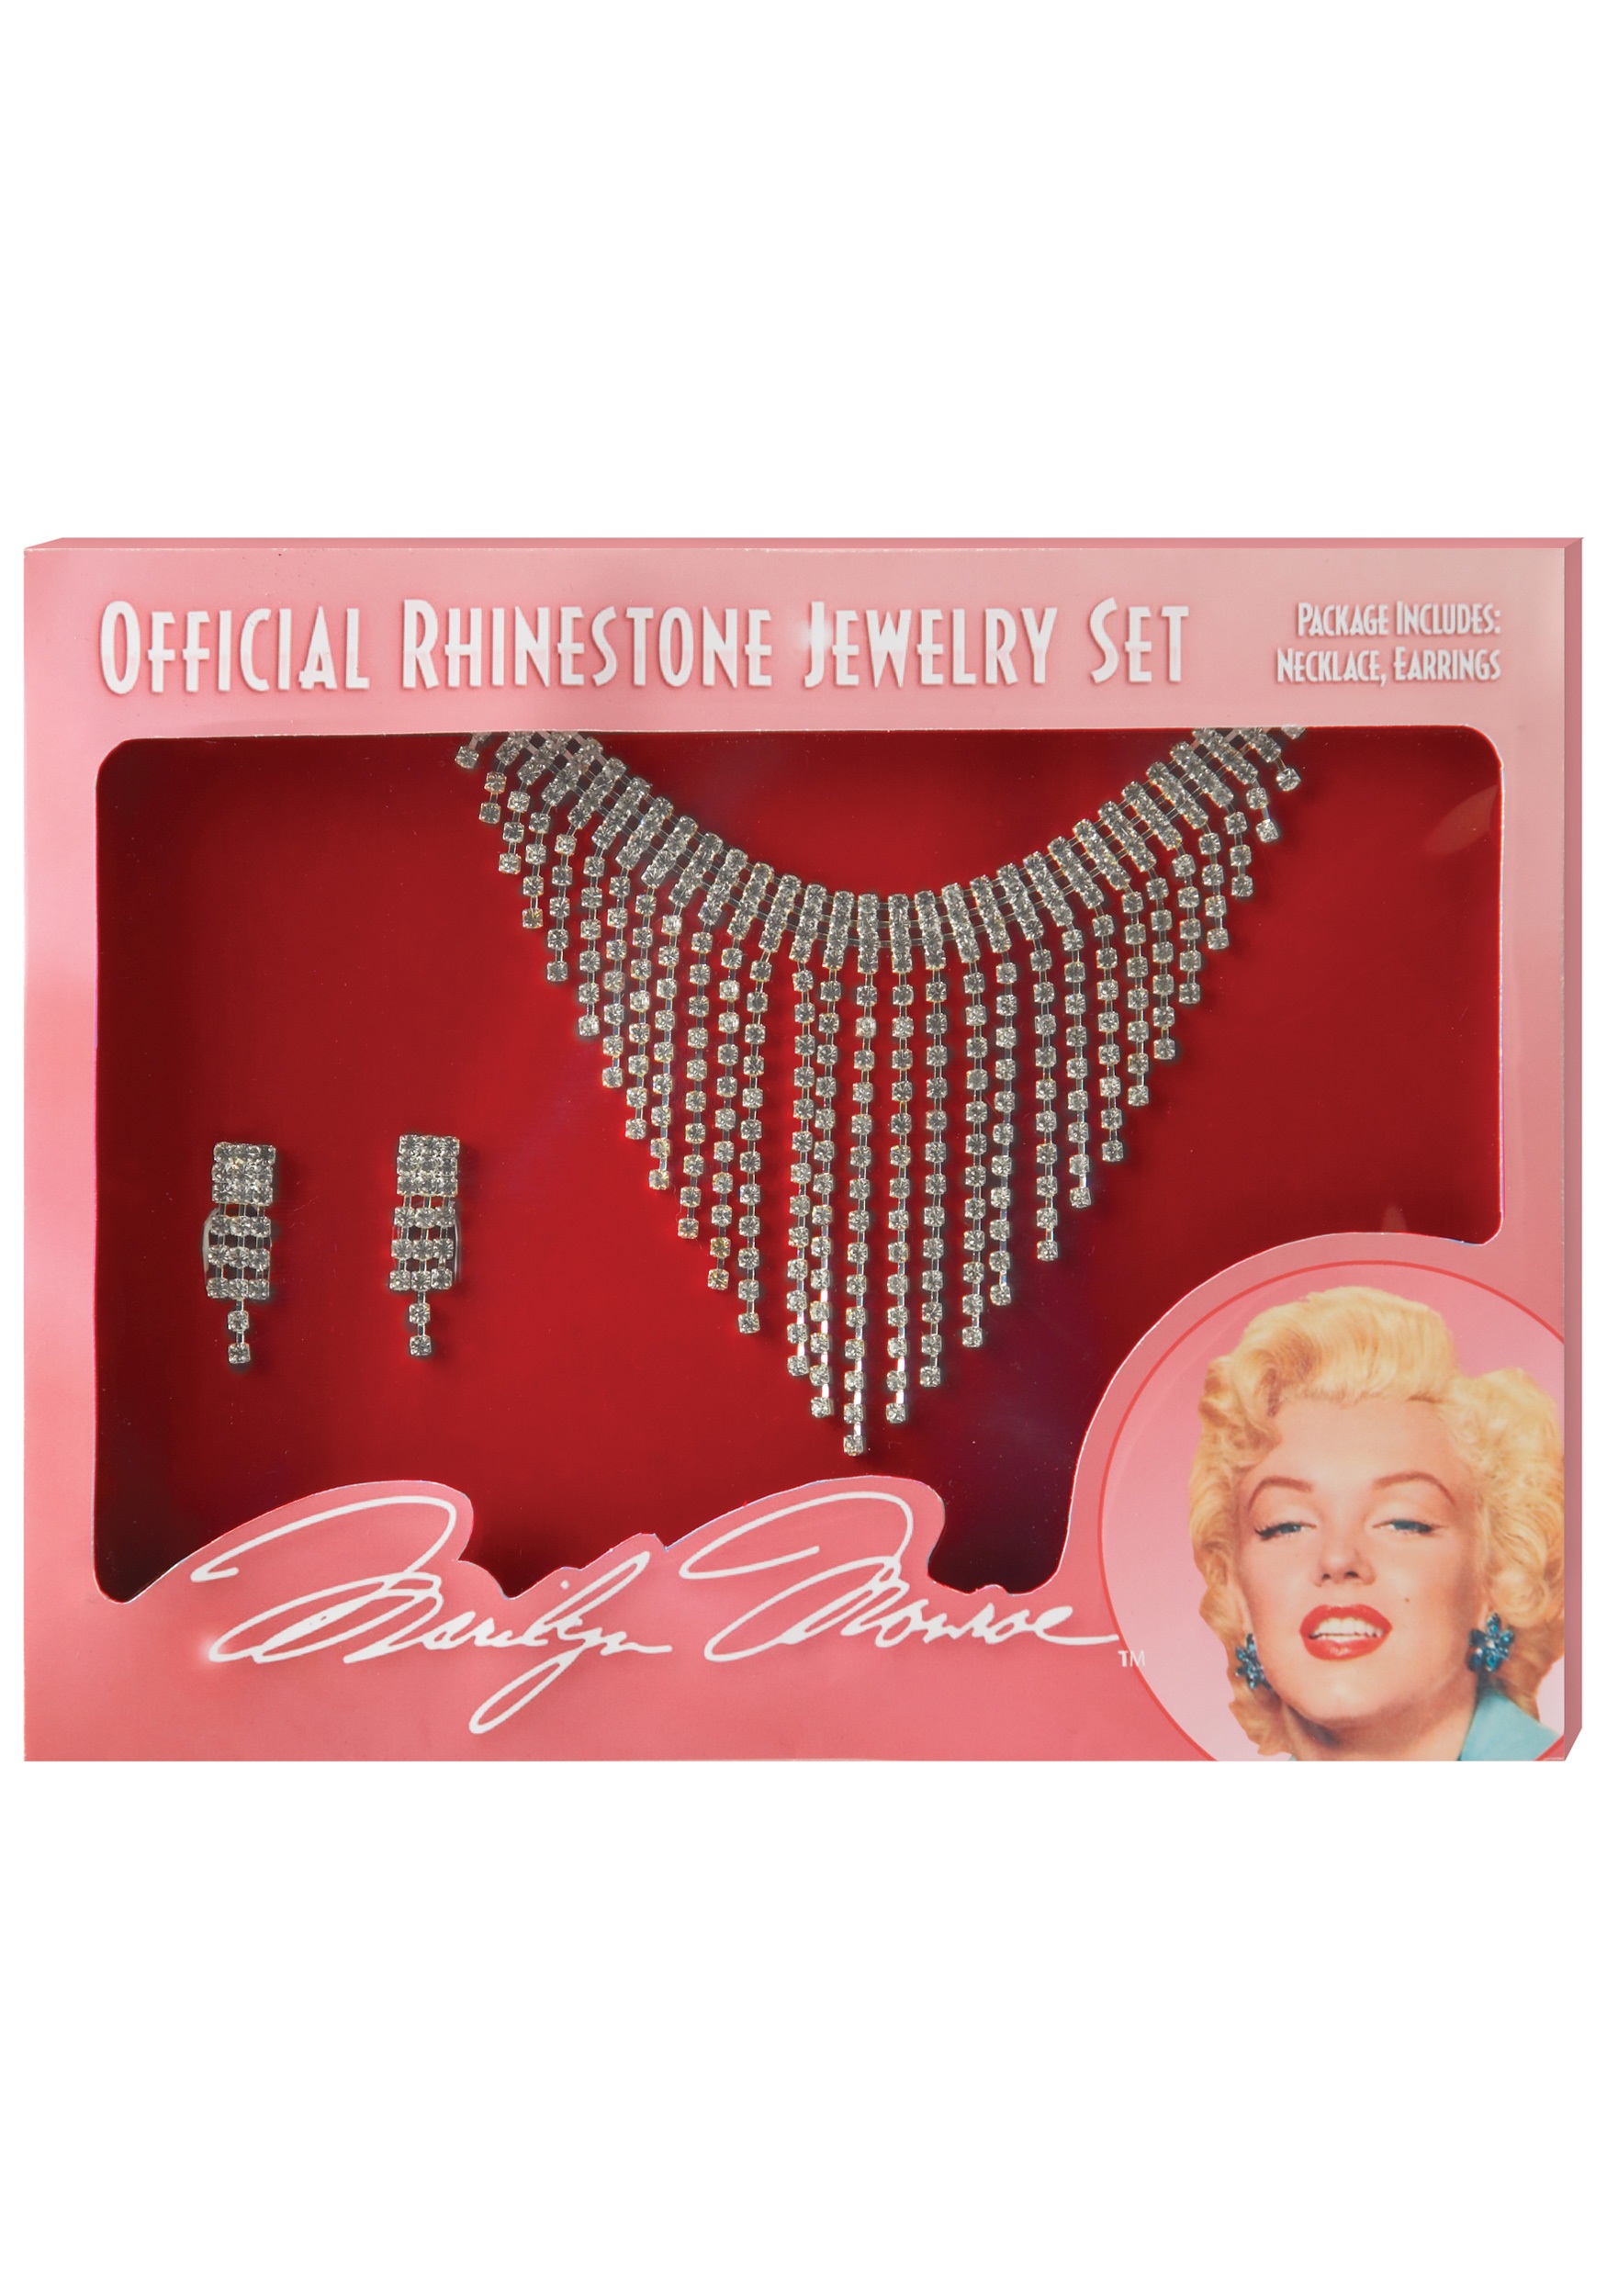 Marilyn Monroe Quotes About Jewelry Quotesgram